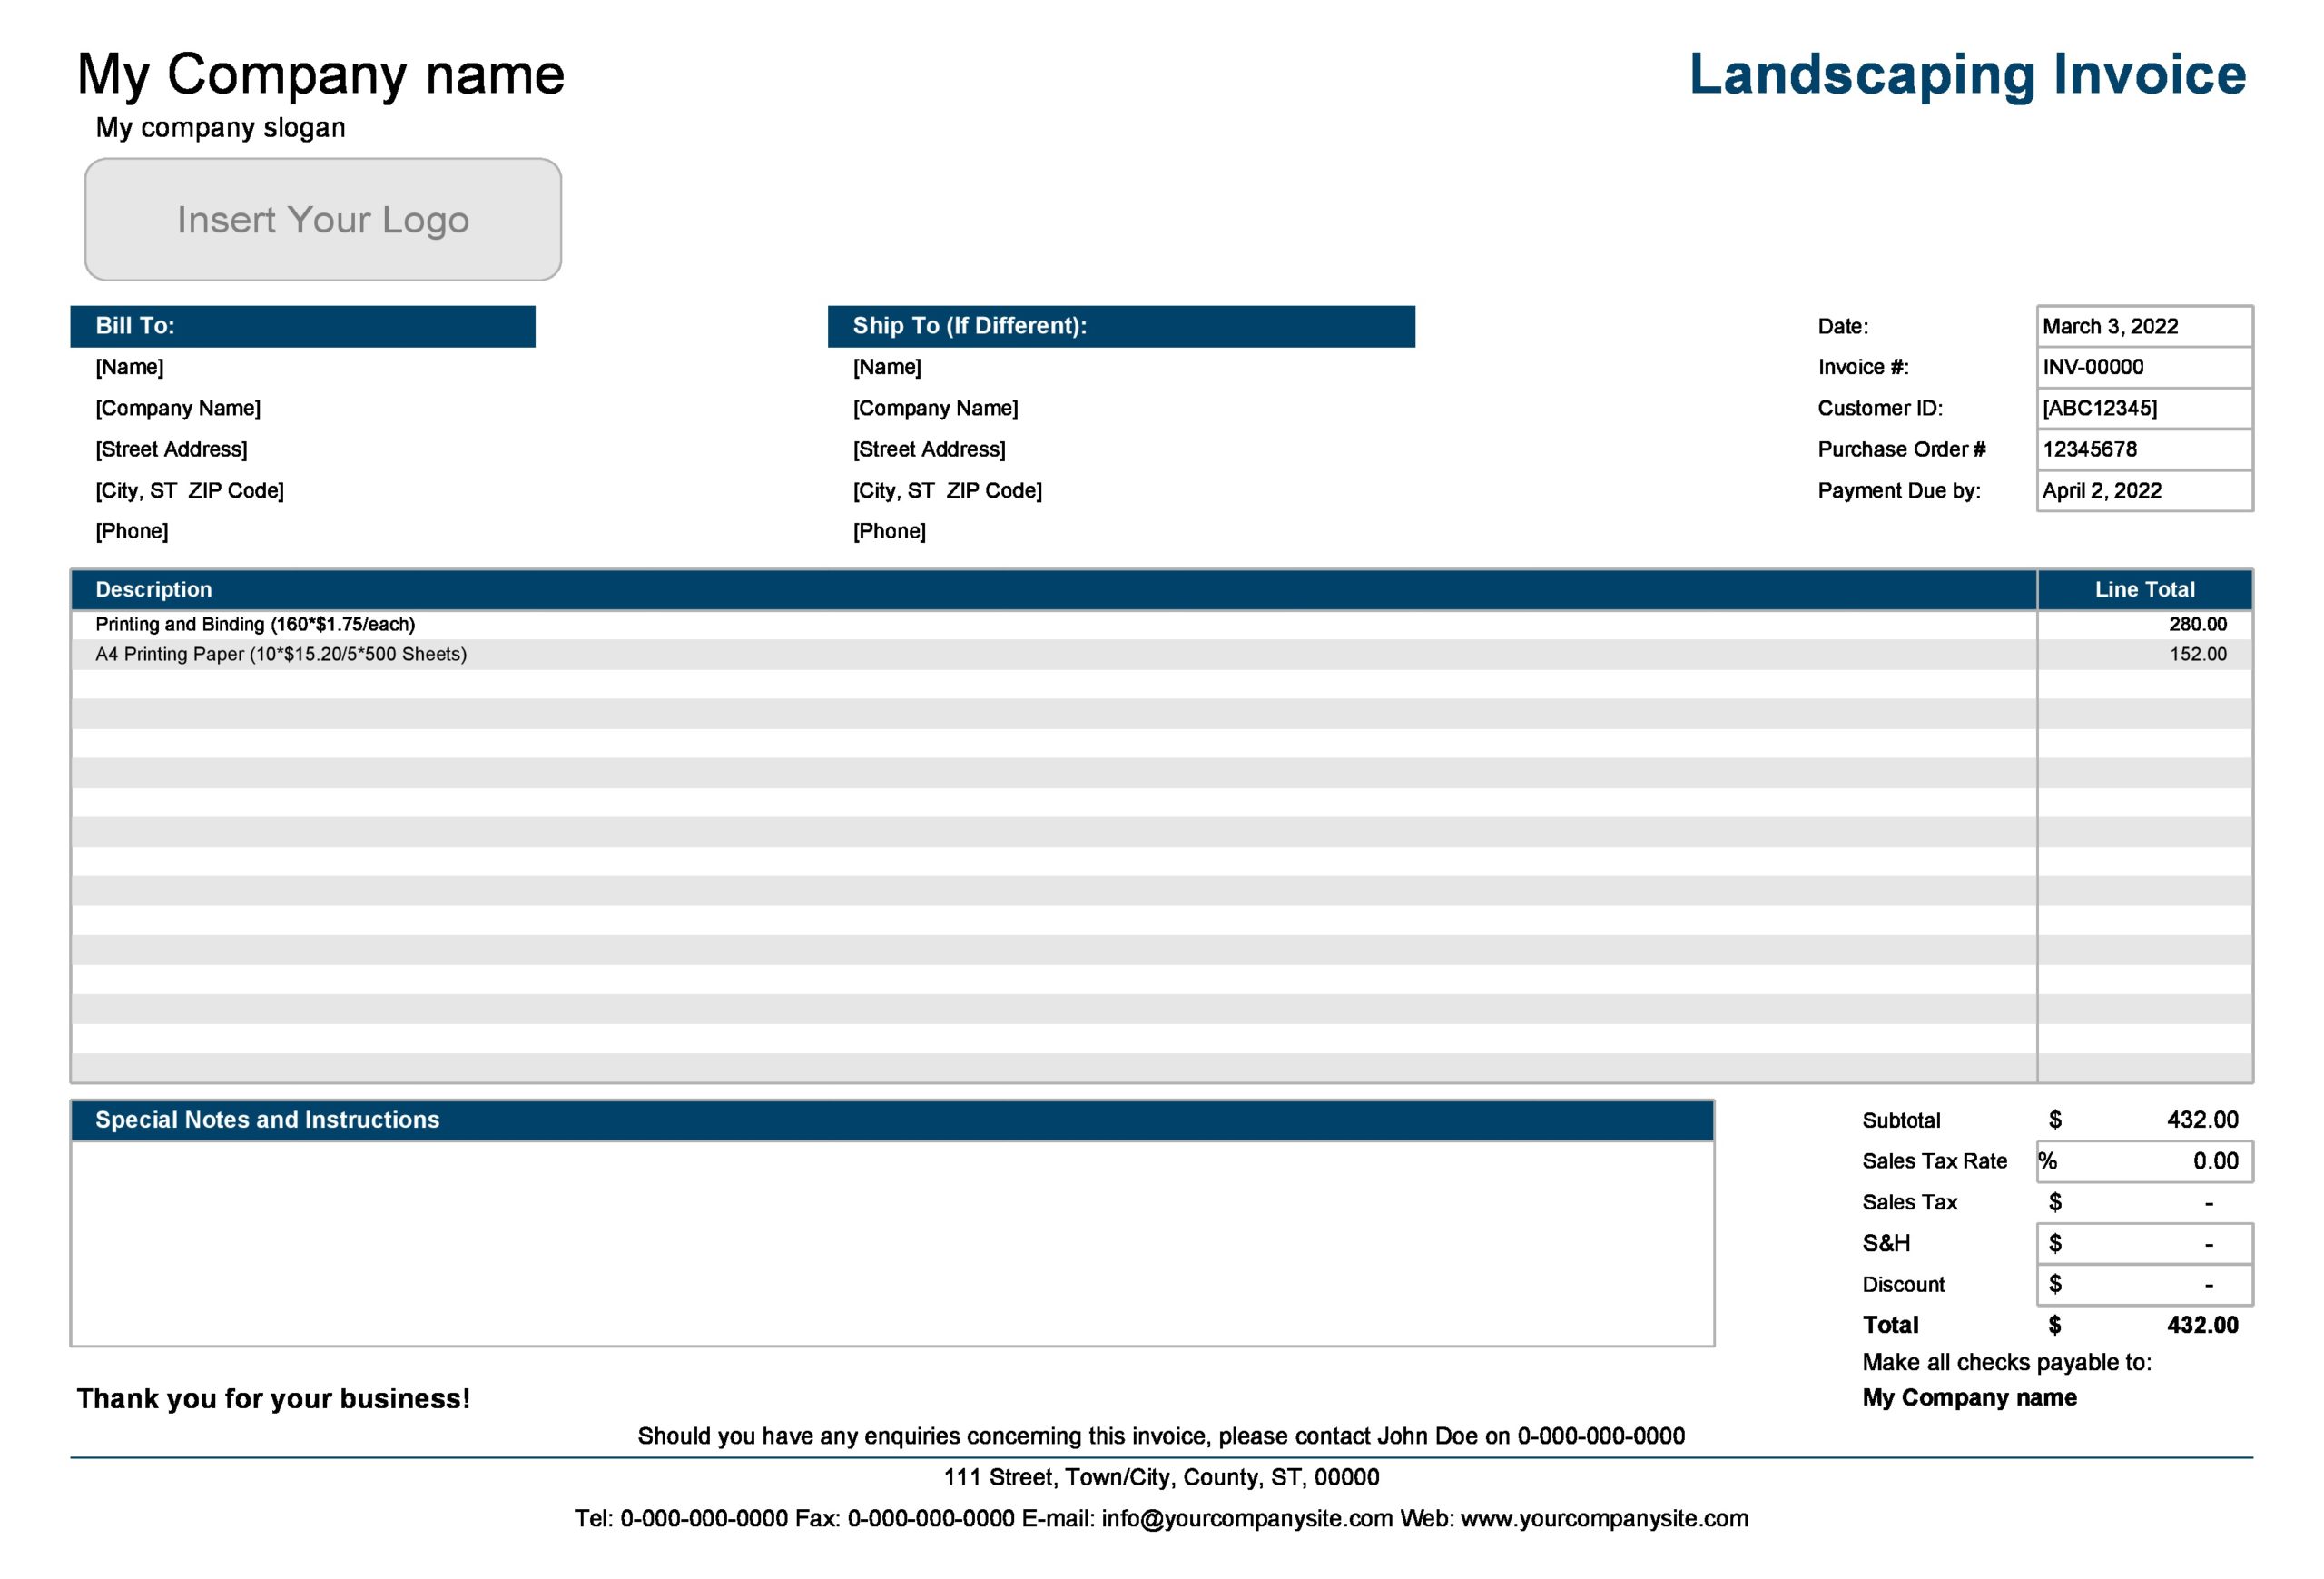 Free landscaping invoice 09